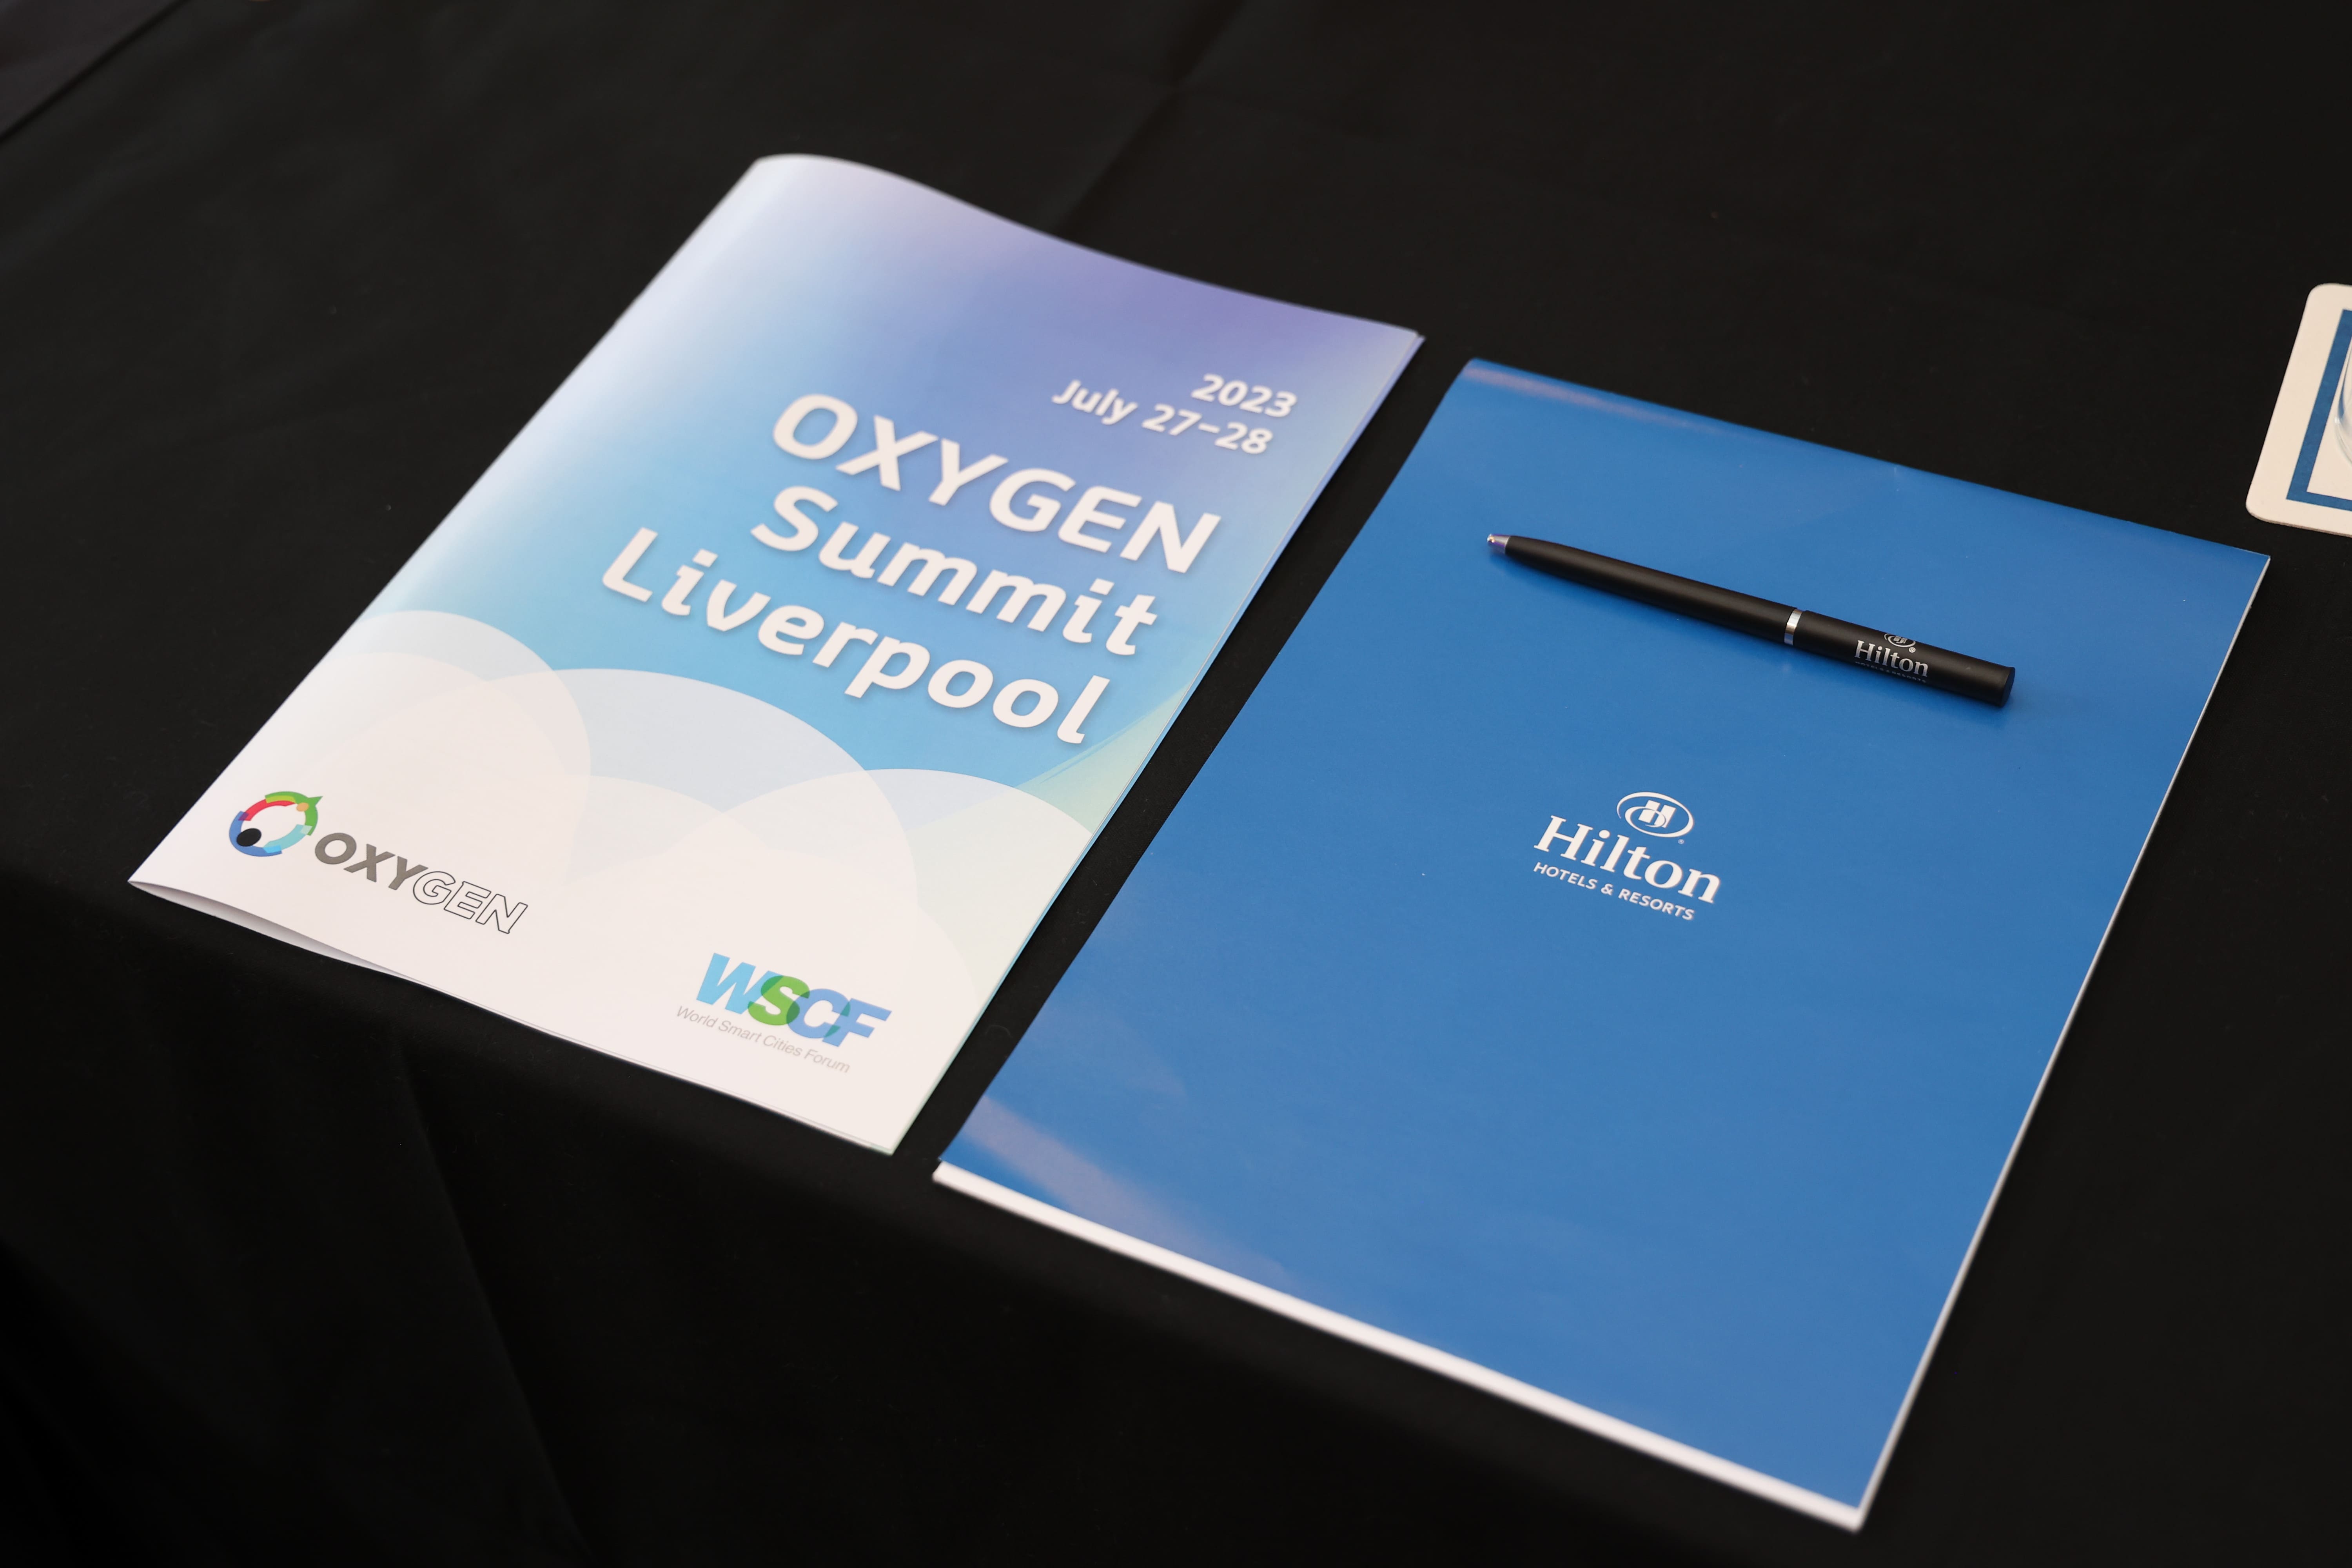 Photo from OXYGEN Summit Liverpool 2023